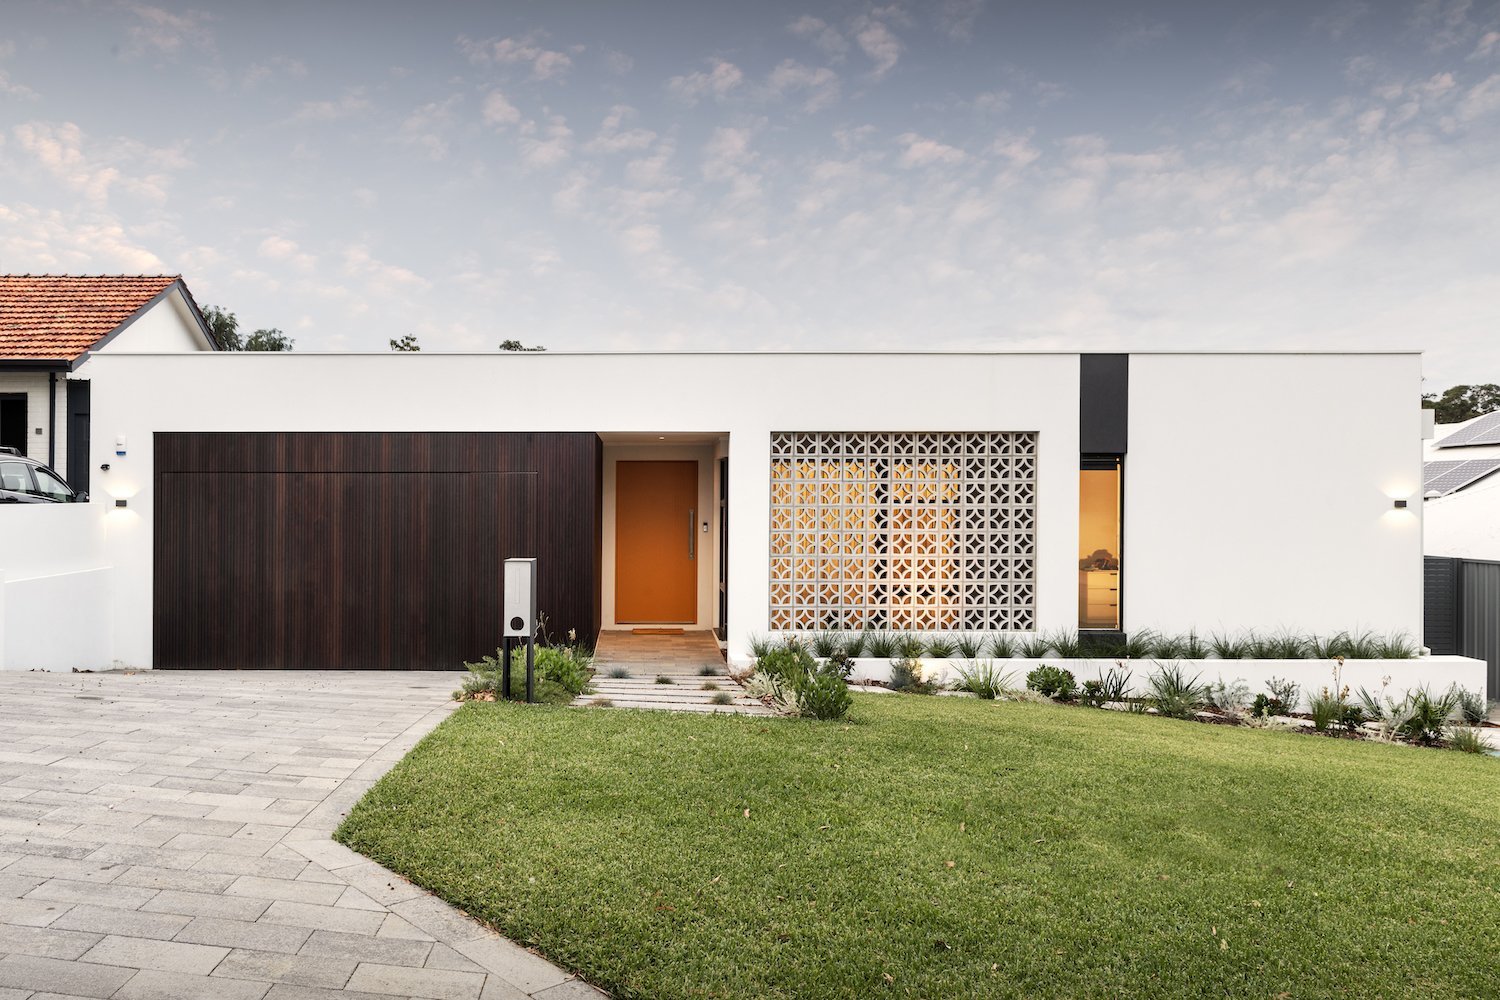 Residential Attitudes - Karrinyup - Gallery - D-Max Photograohy
http://www.dmaxphotography.com.au
joel@dmaxphotography.com.au